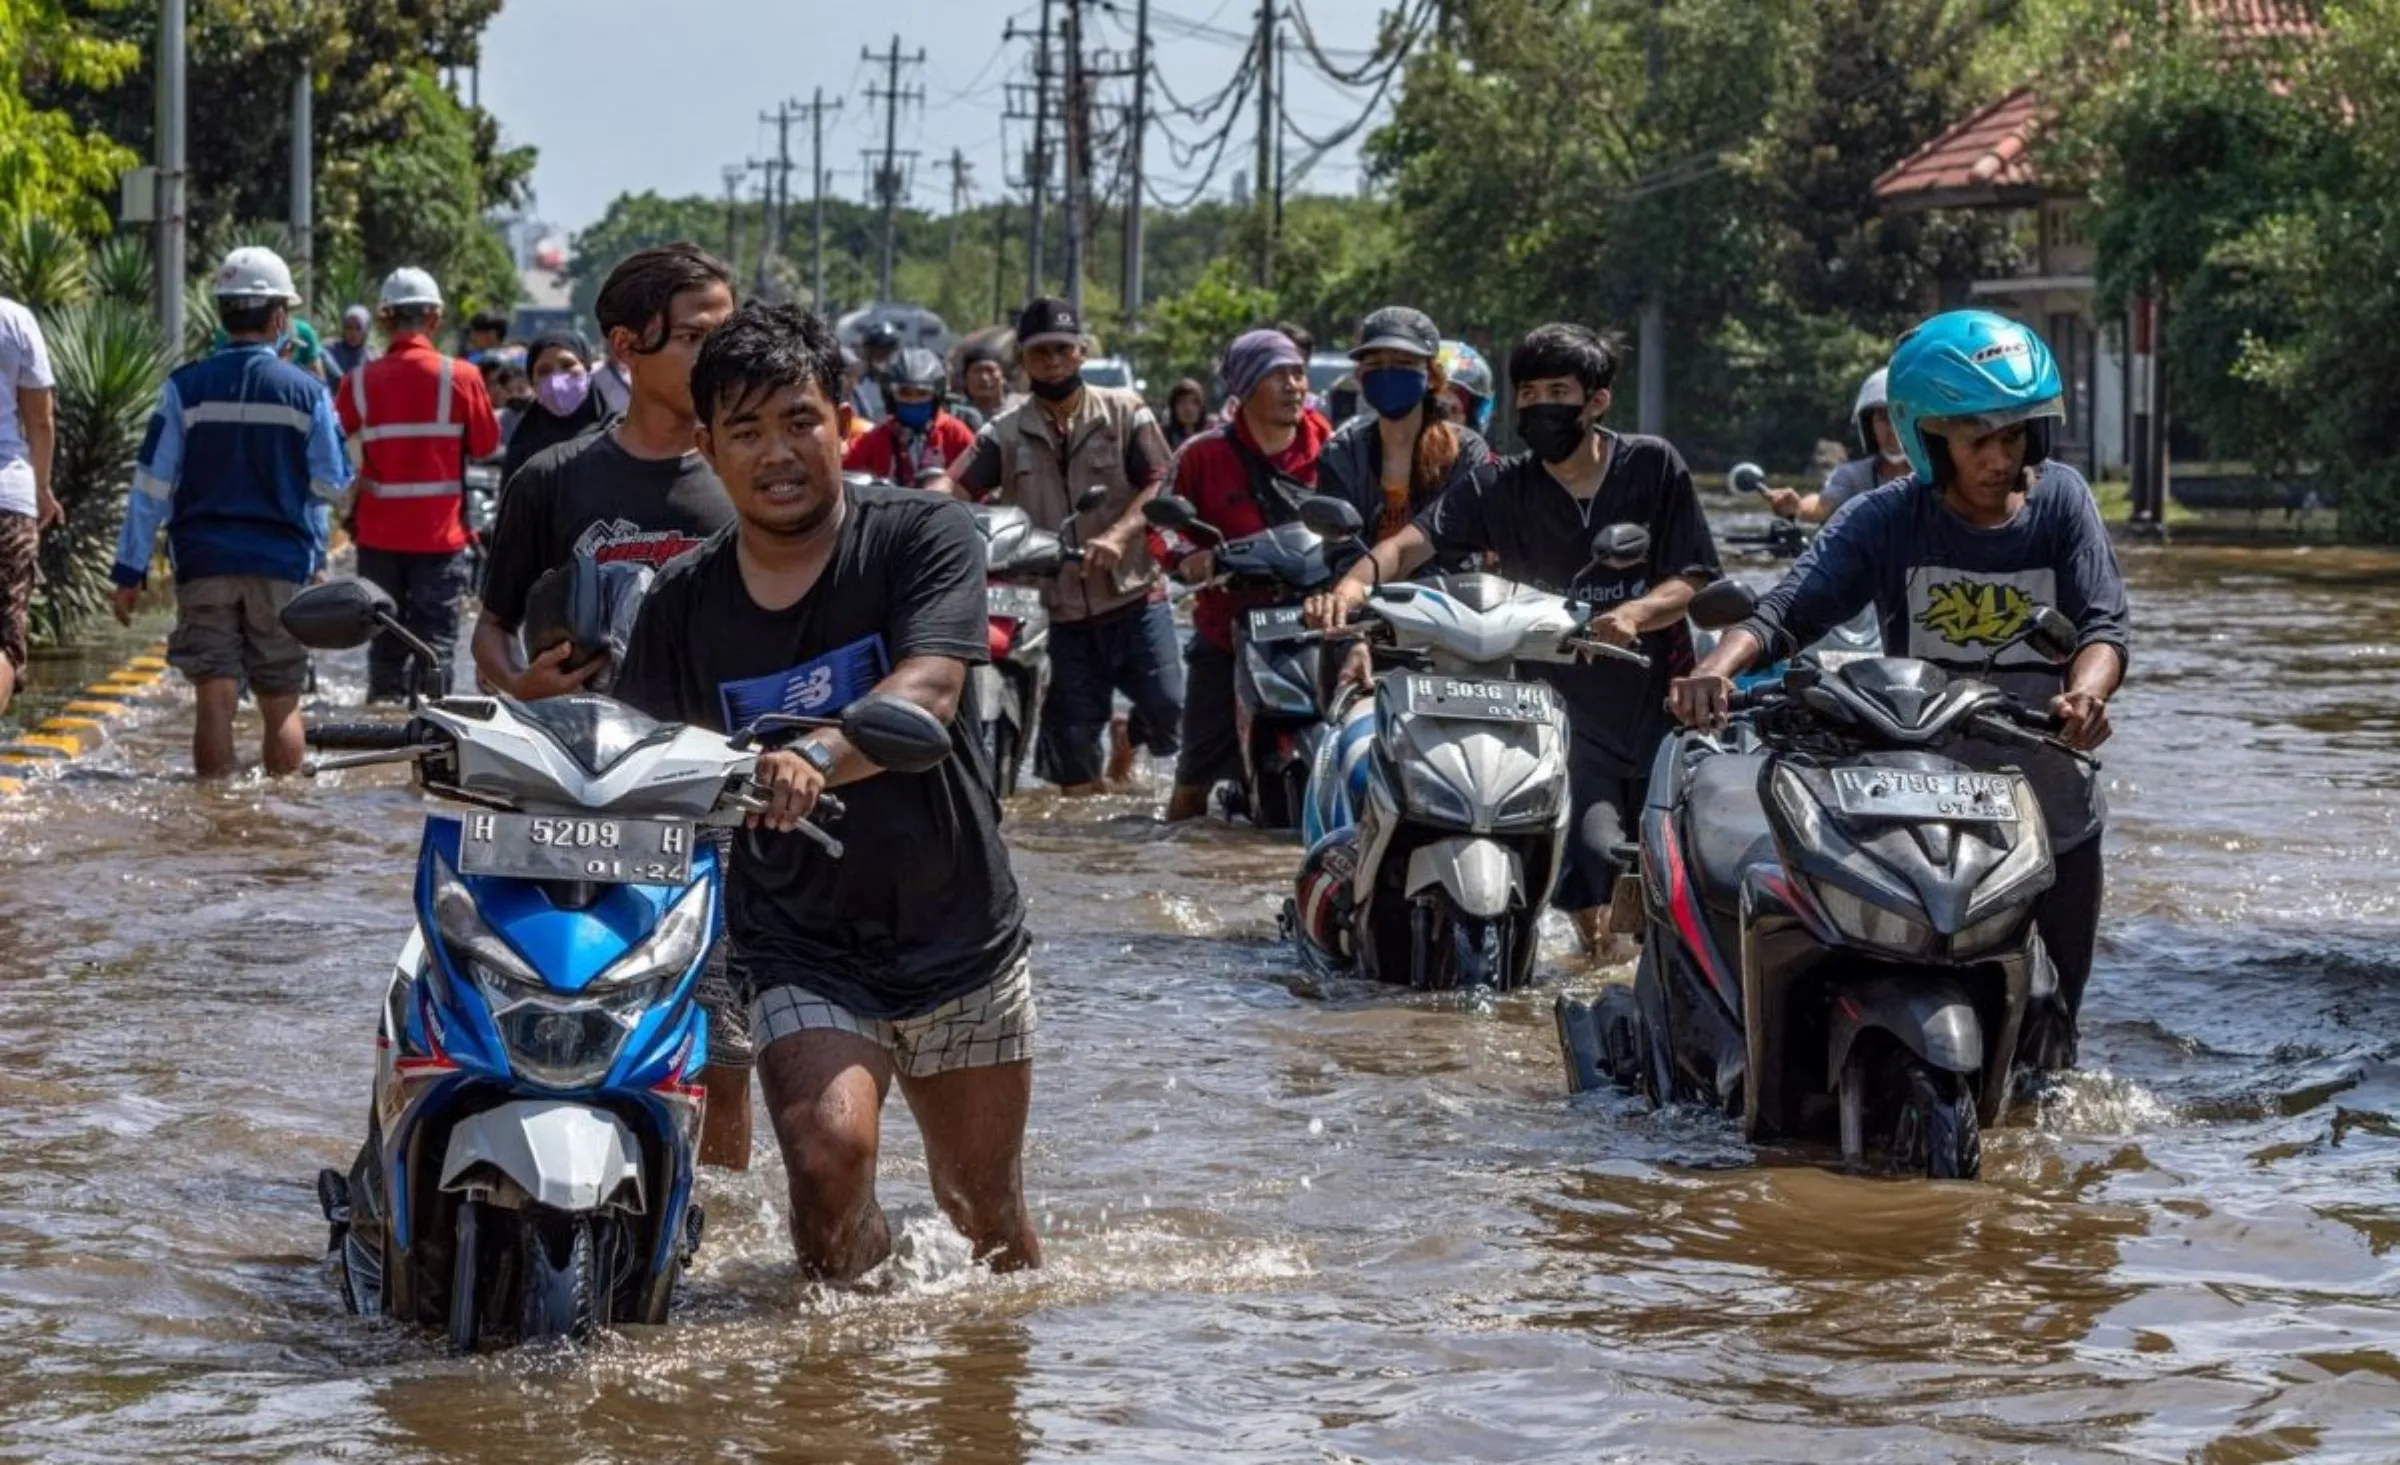 Workers push their motorbike through the water at Tanjung Emas container port terminal area which got flooded following high tides and broken seawalls, in Semarang, Central Java province, Indonesia, May 24, 2022